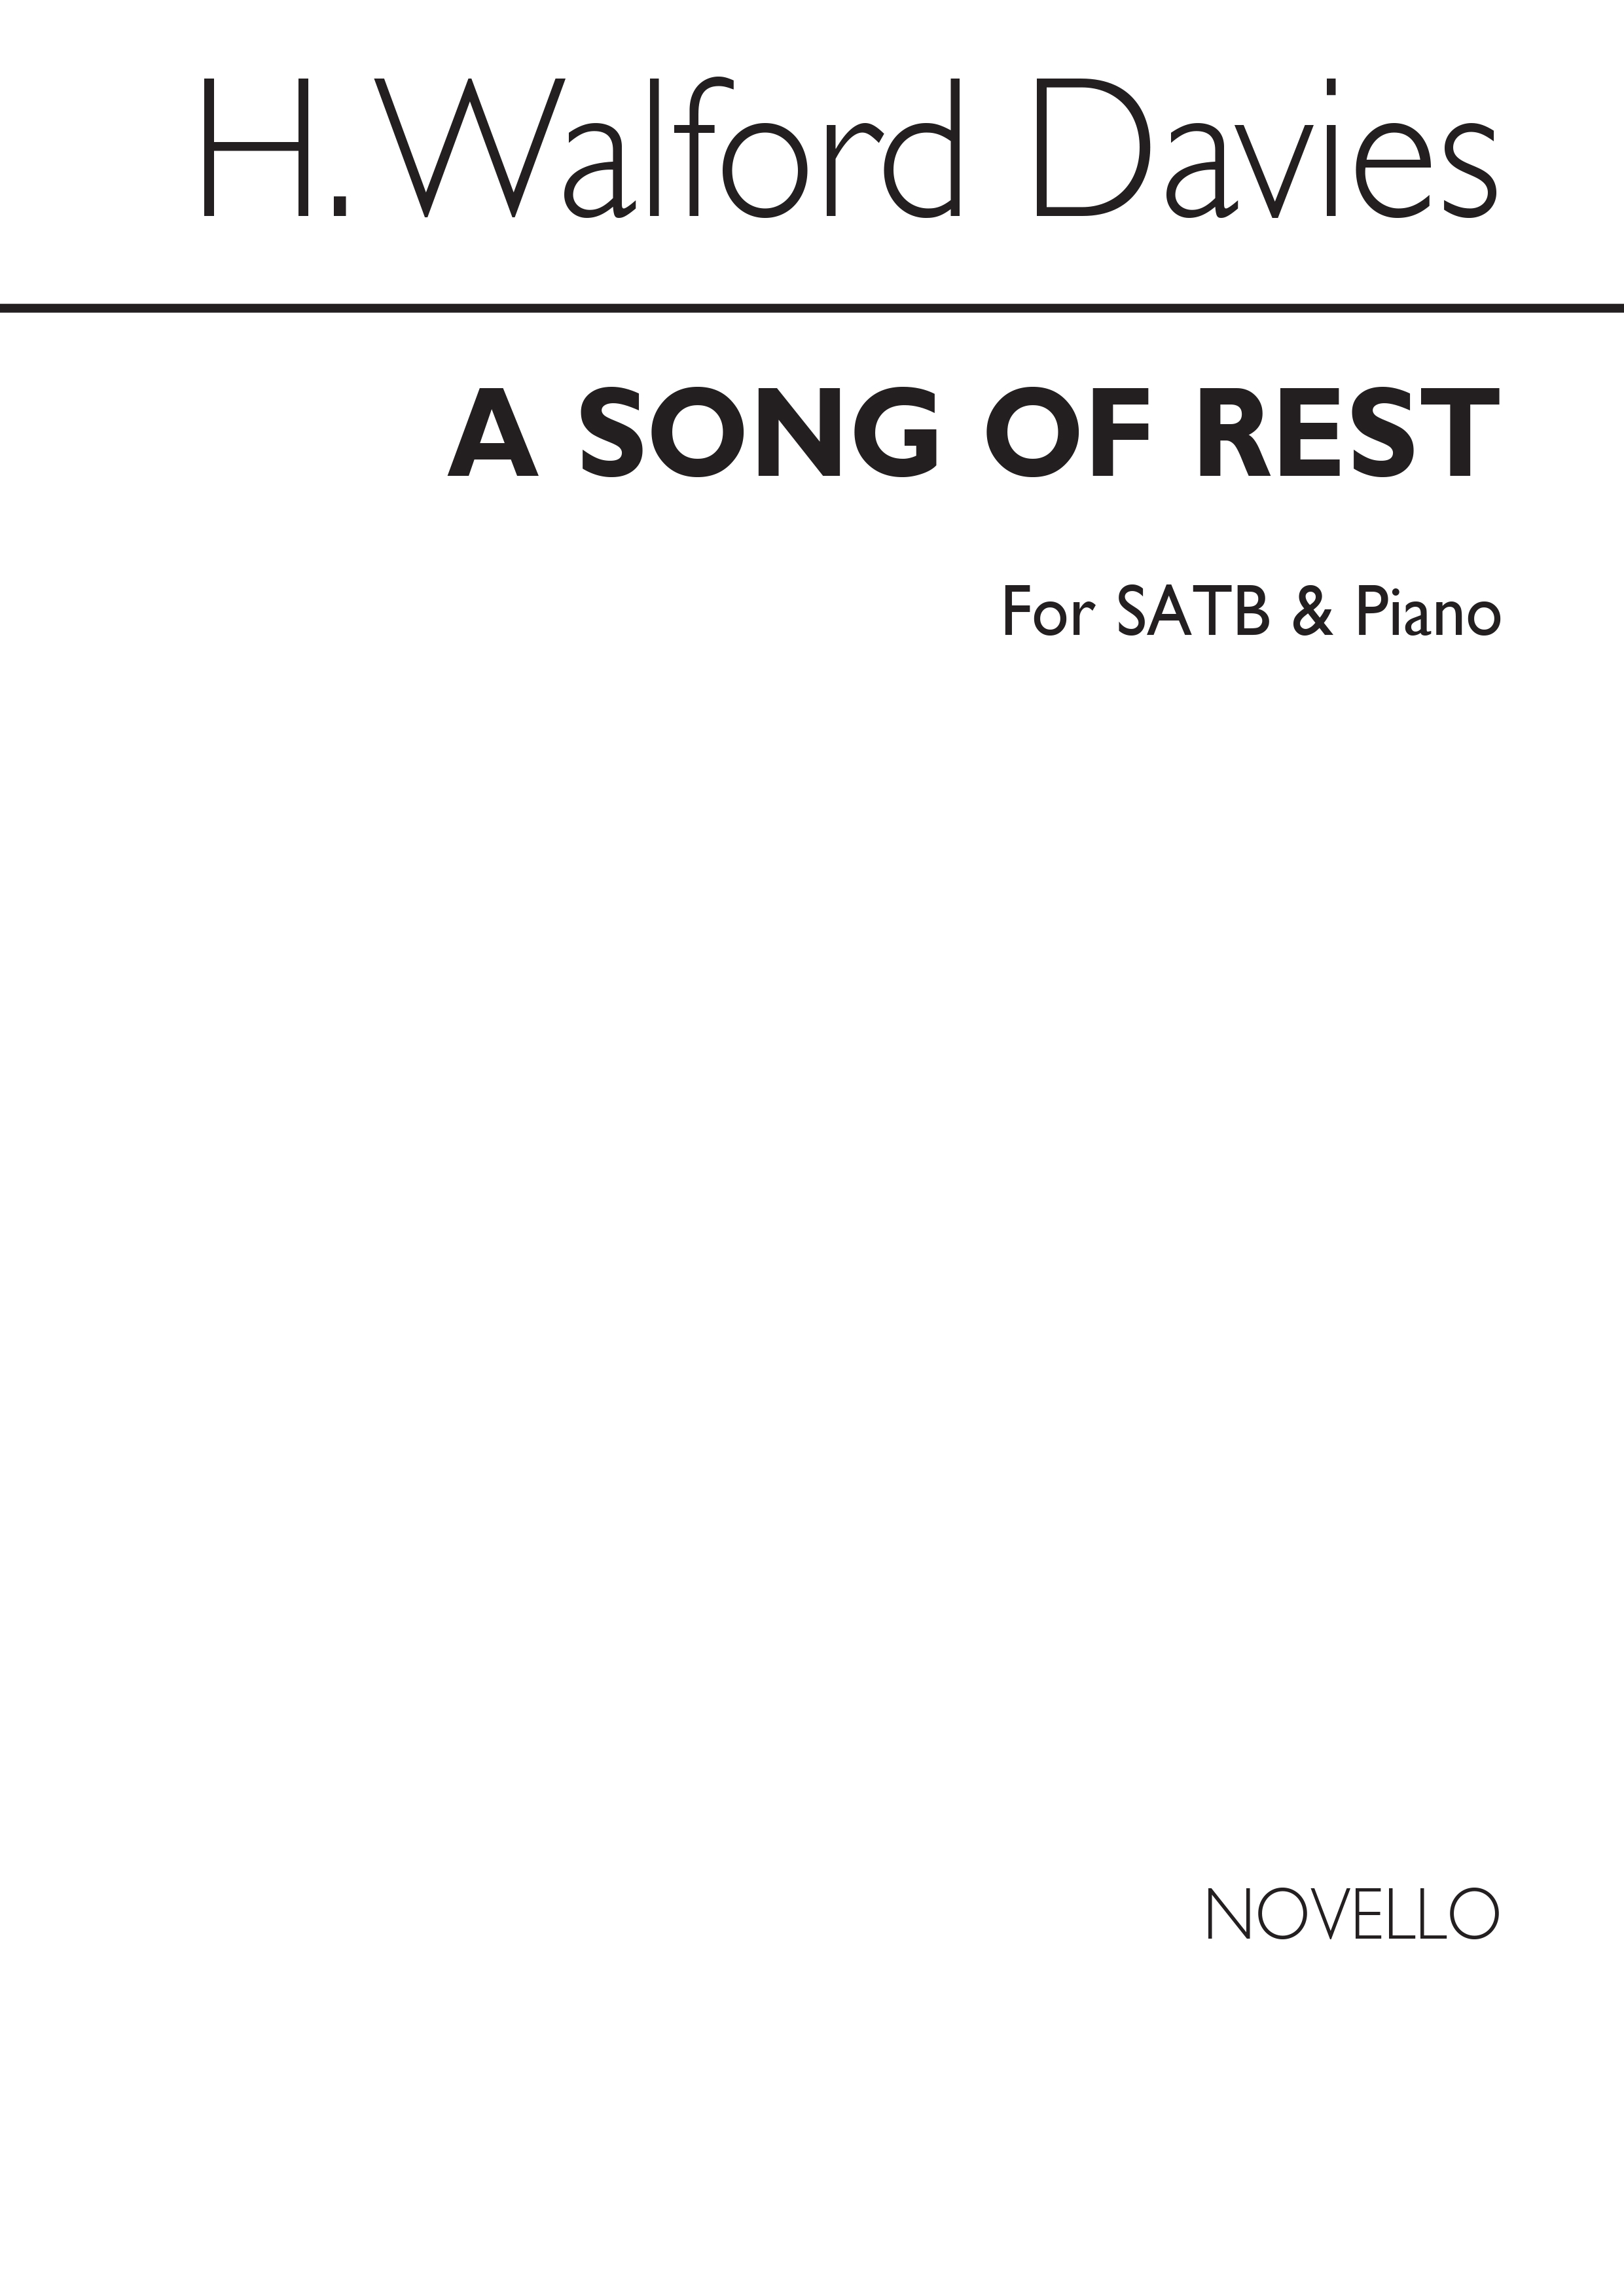 H. Walford Davies: Walford-davies A Song Of Rest: SATB: Vocal Score